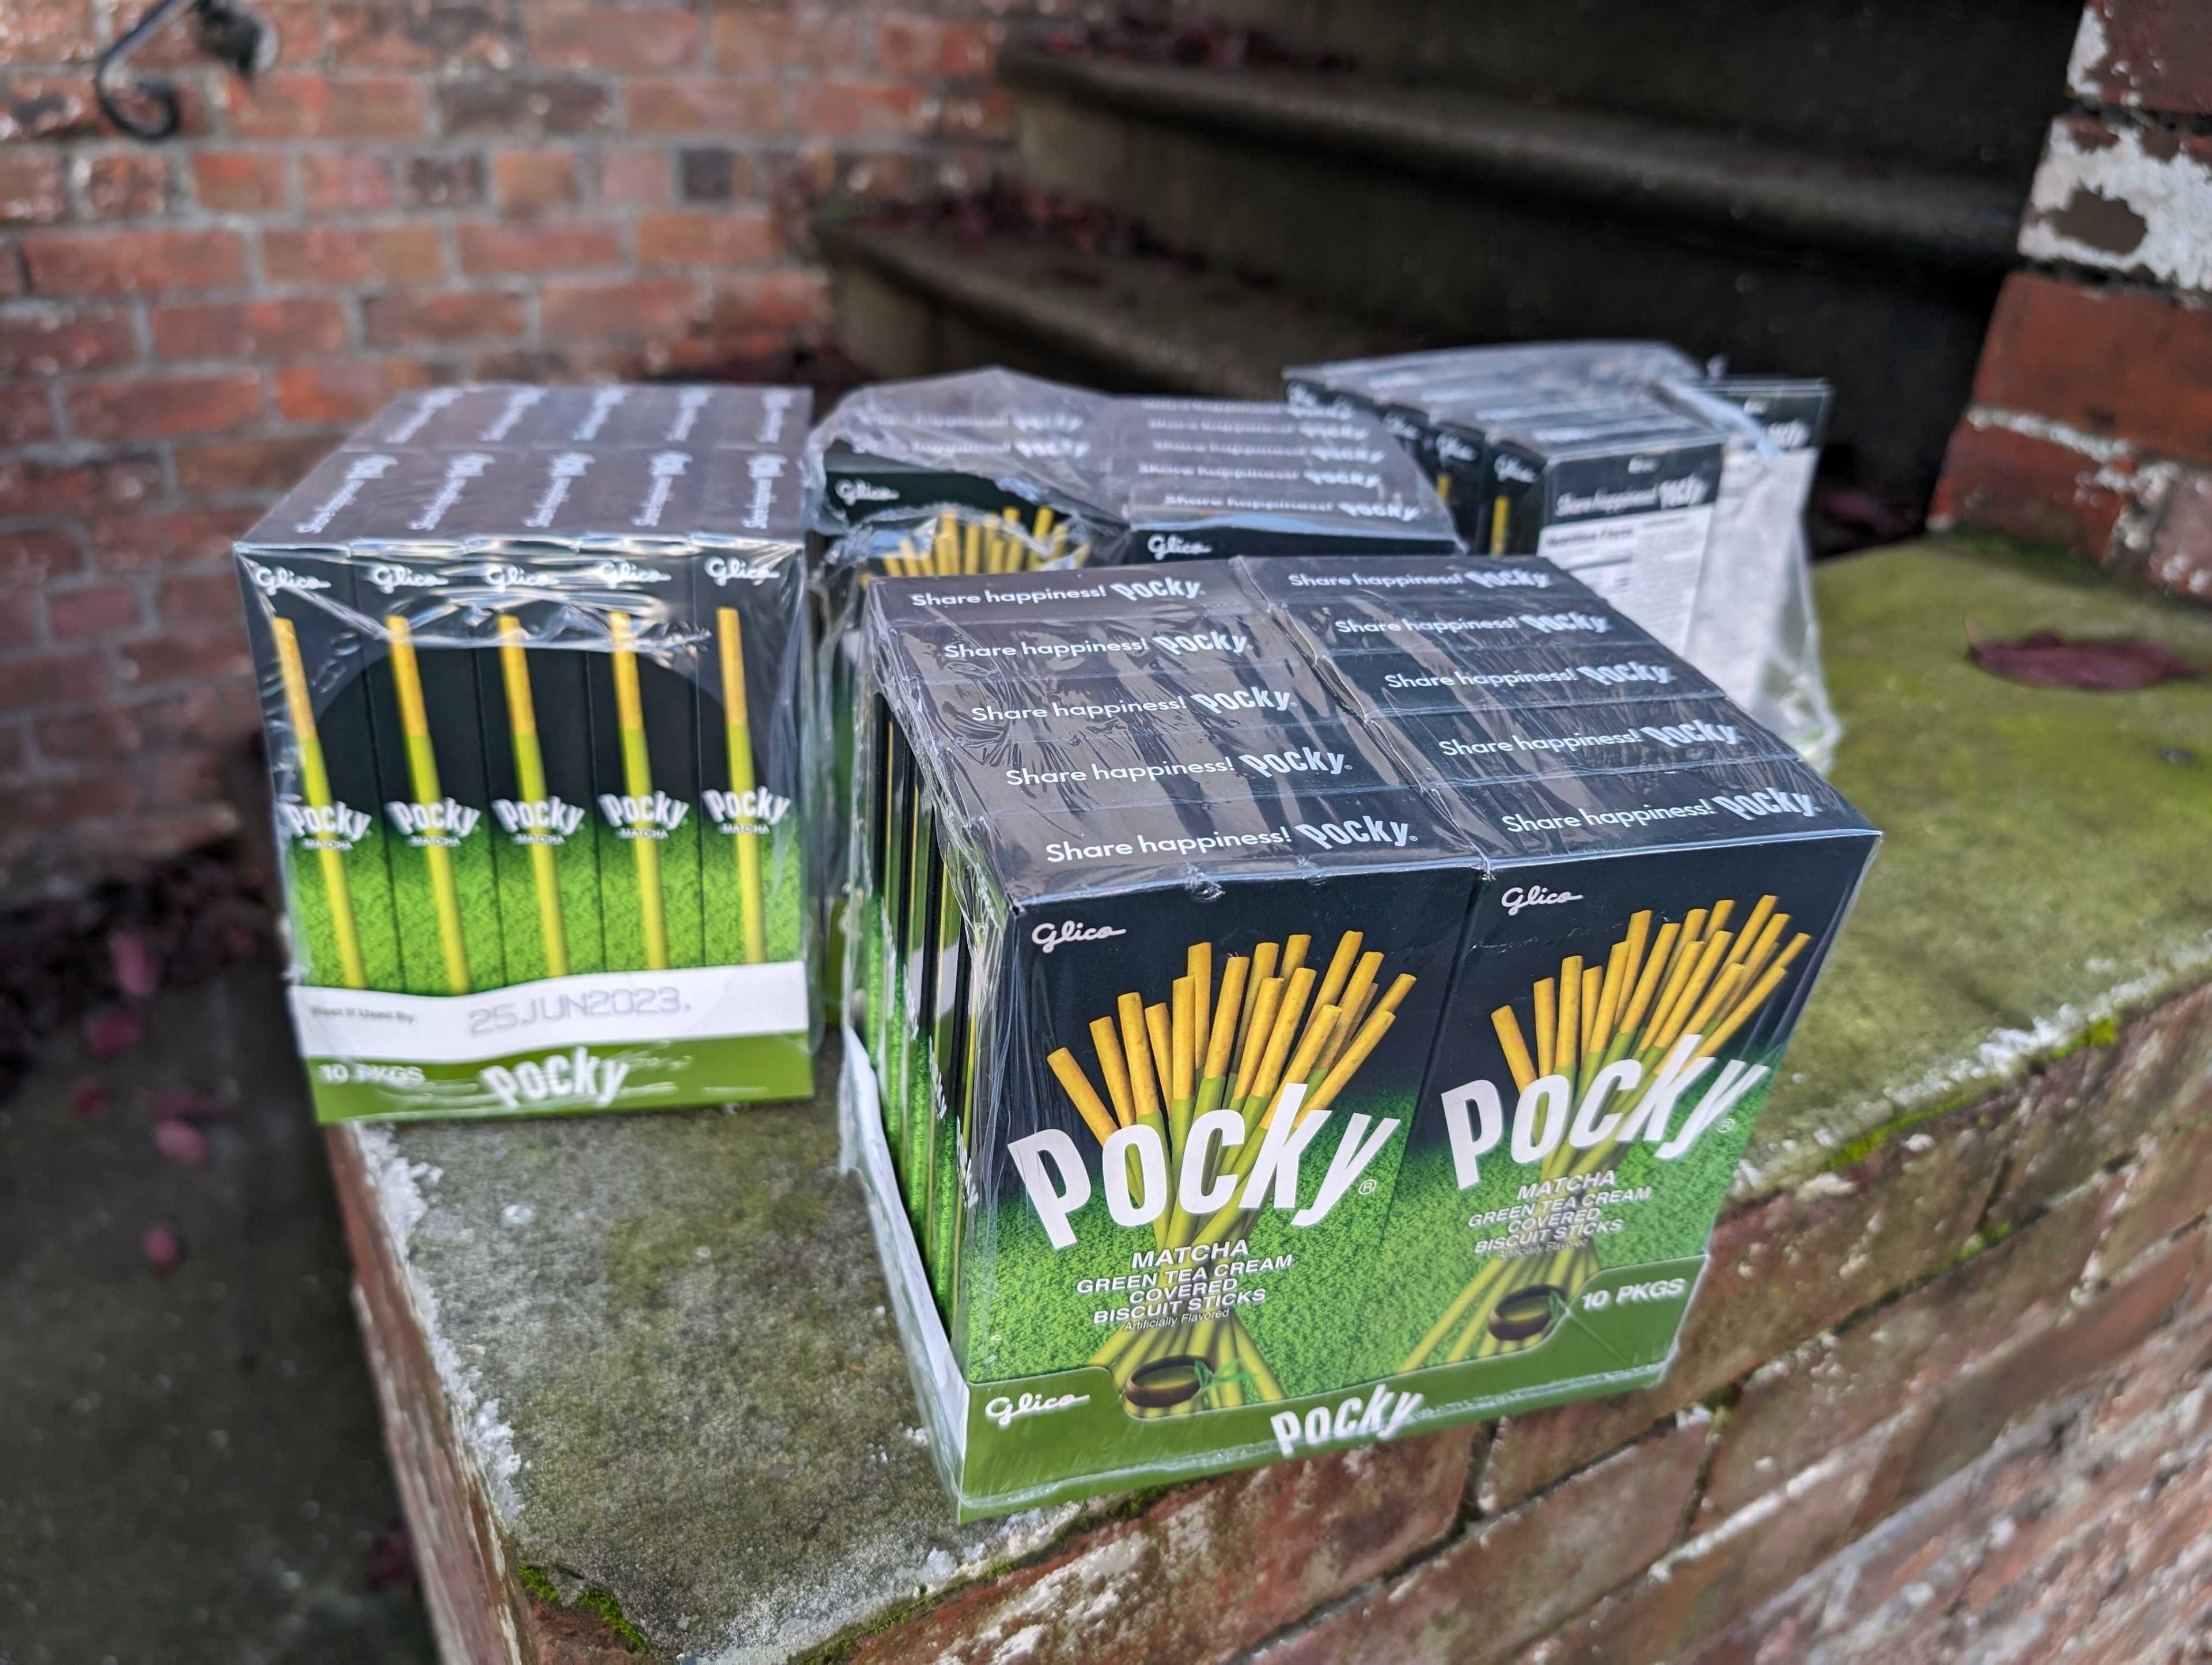 Four plastic-wrapped boxes of matcha green tea cream flavored Pocky biscuit sticks sit on a low brick stoop.